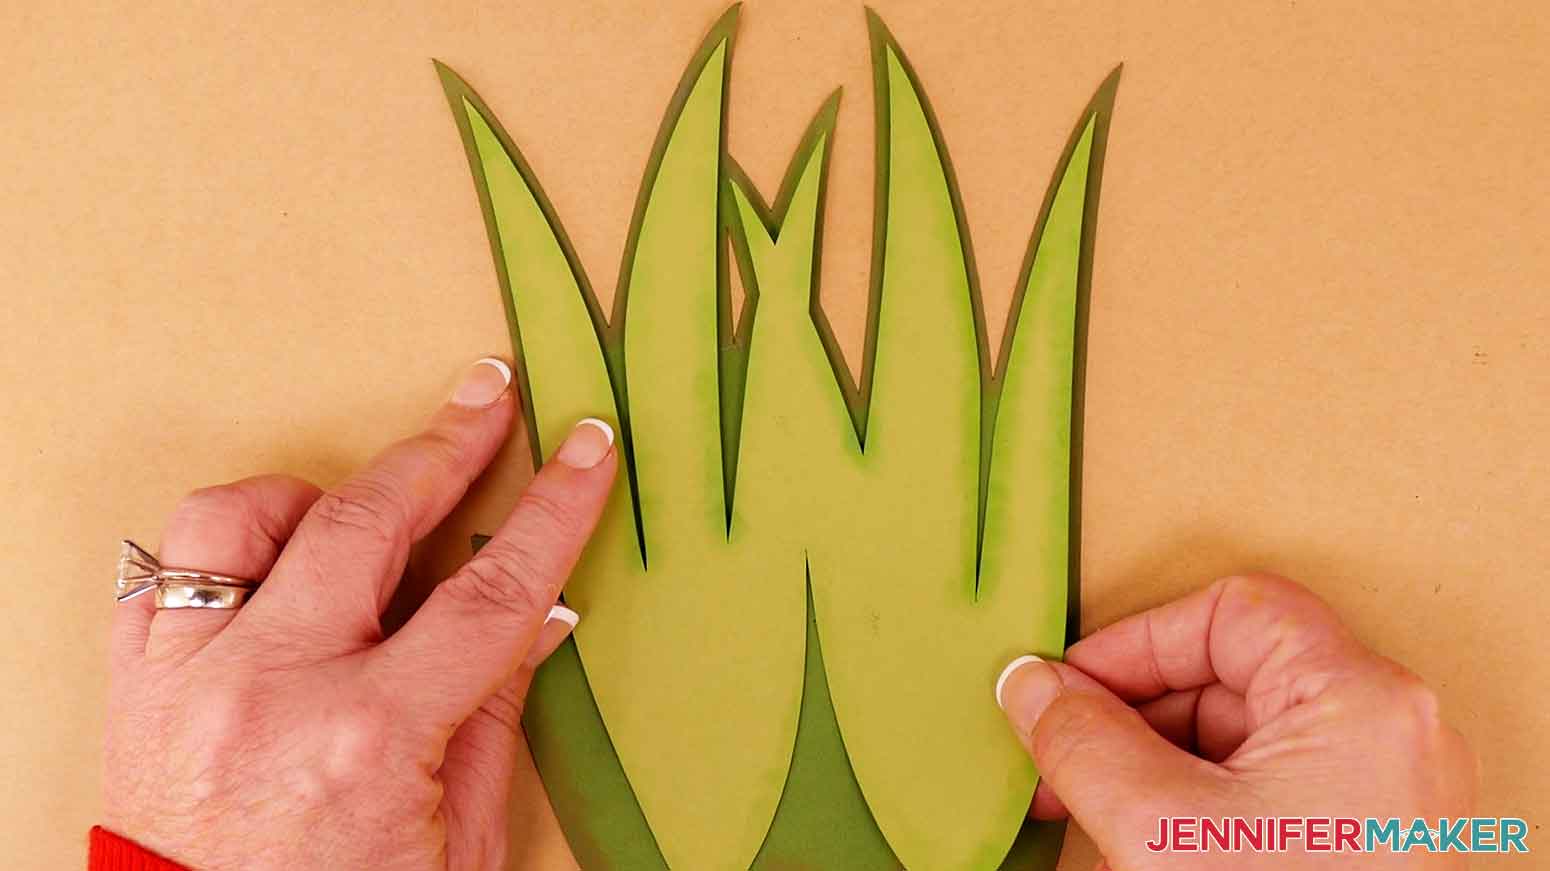 Align the light green leaf layer over the dark green leaf layer and press the green layers together.